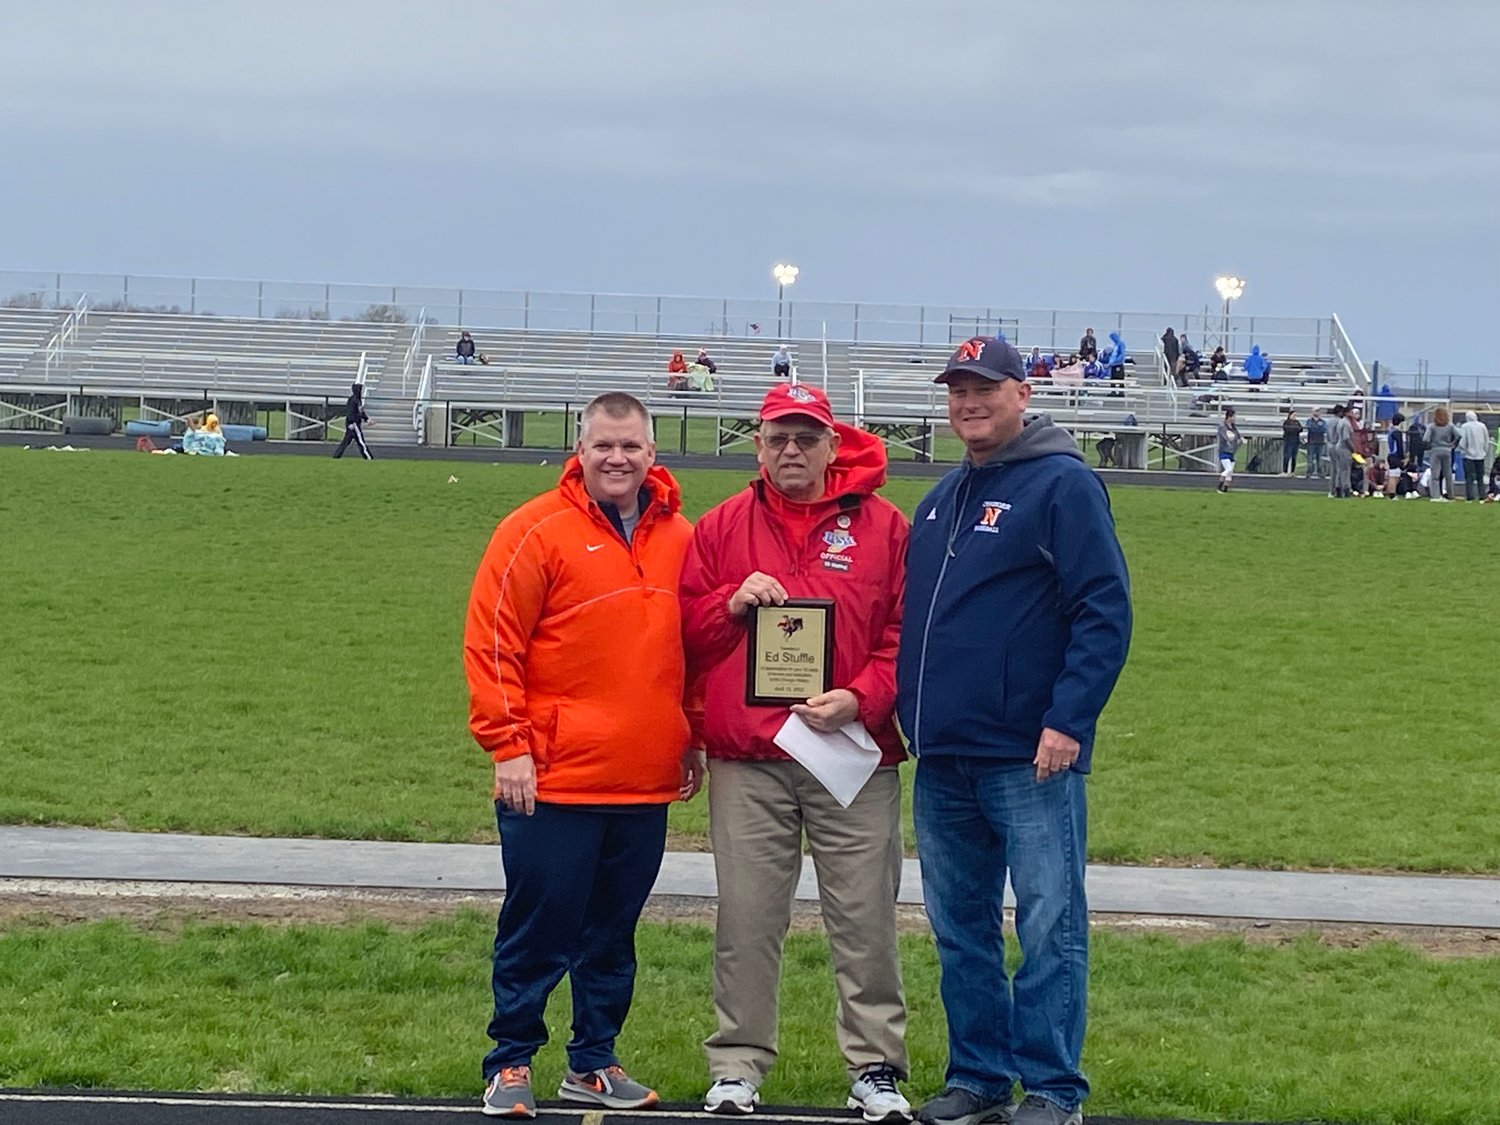 Ed Stuffle (center) is presented with an honor plaque by North Montgomery track coach Josh Thompson (left) and North Montgomery Athletic Director Matt Merica (right) for his 50 years of service and dedication to the Charger Relays.